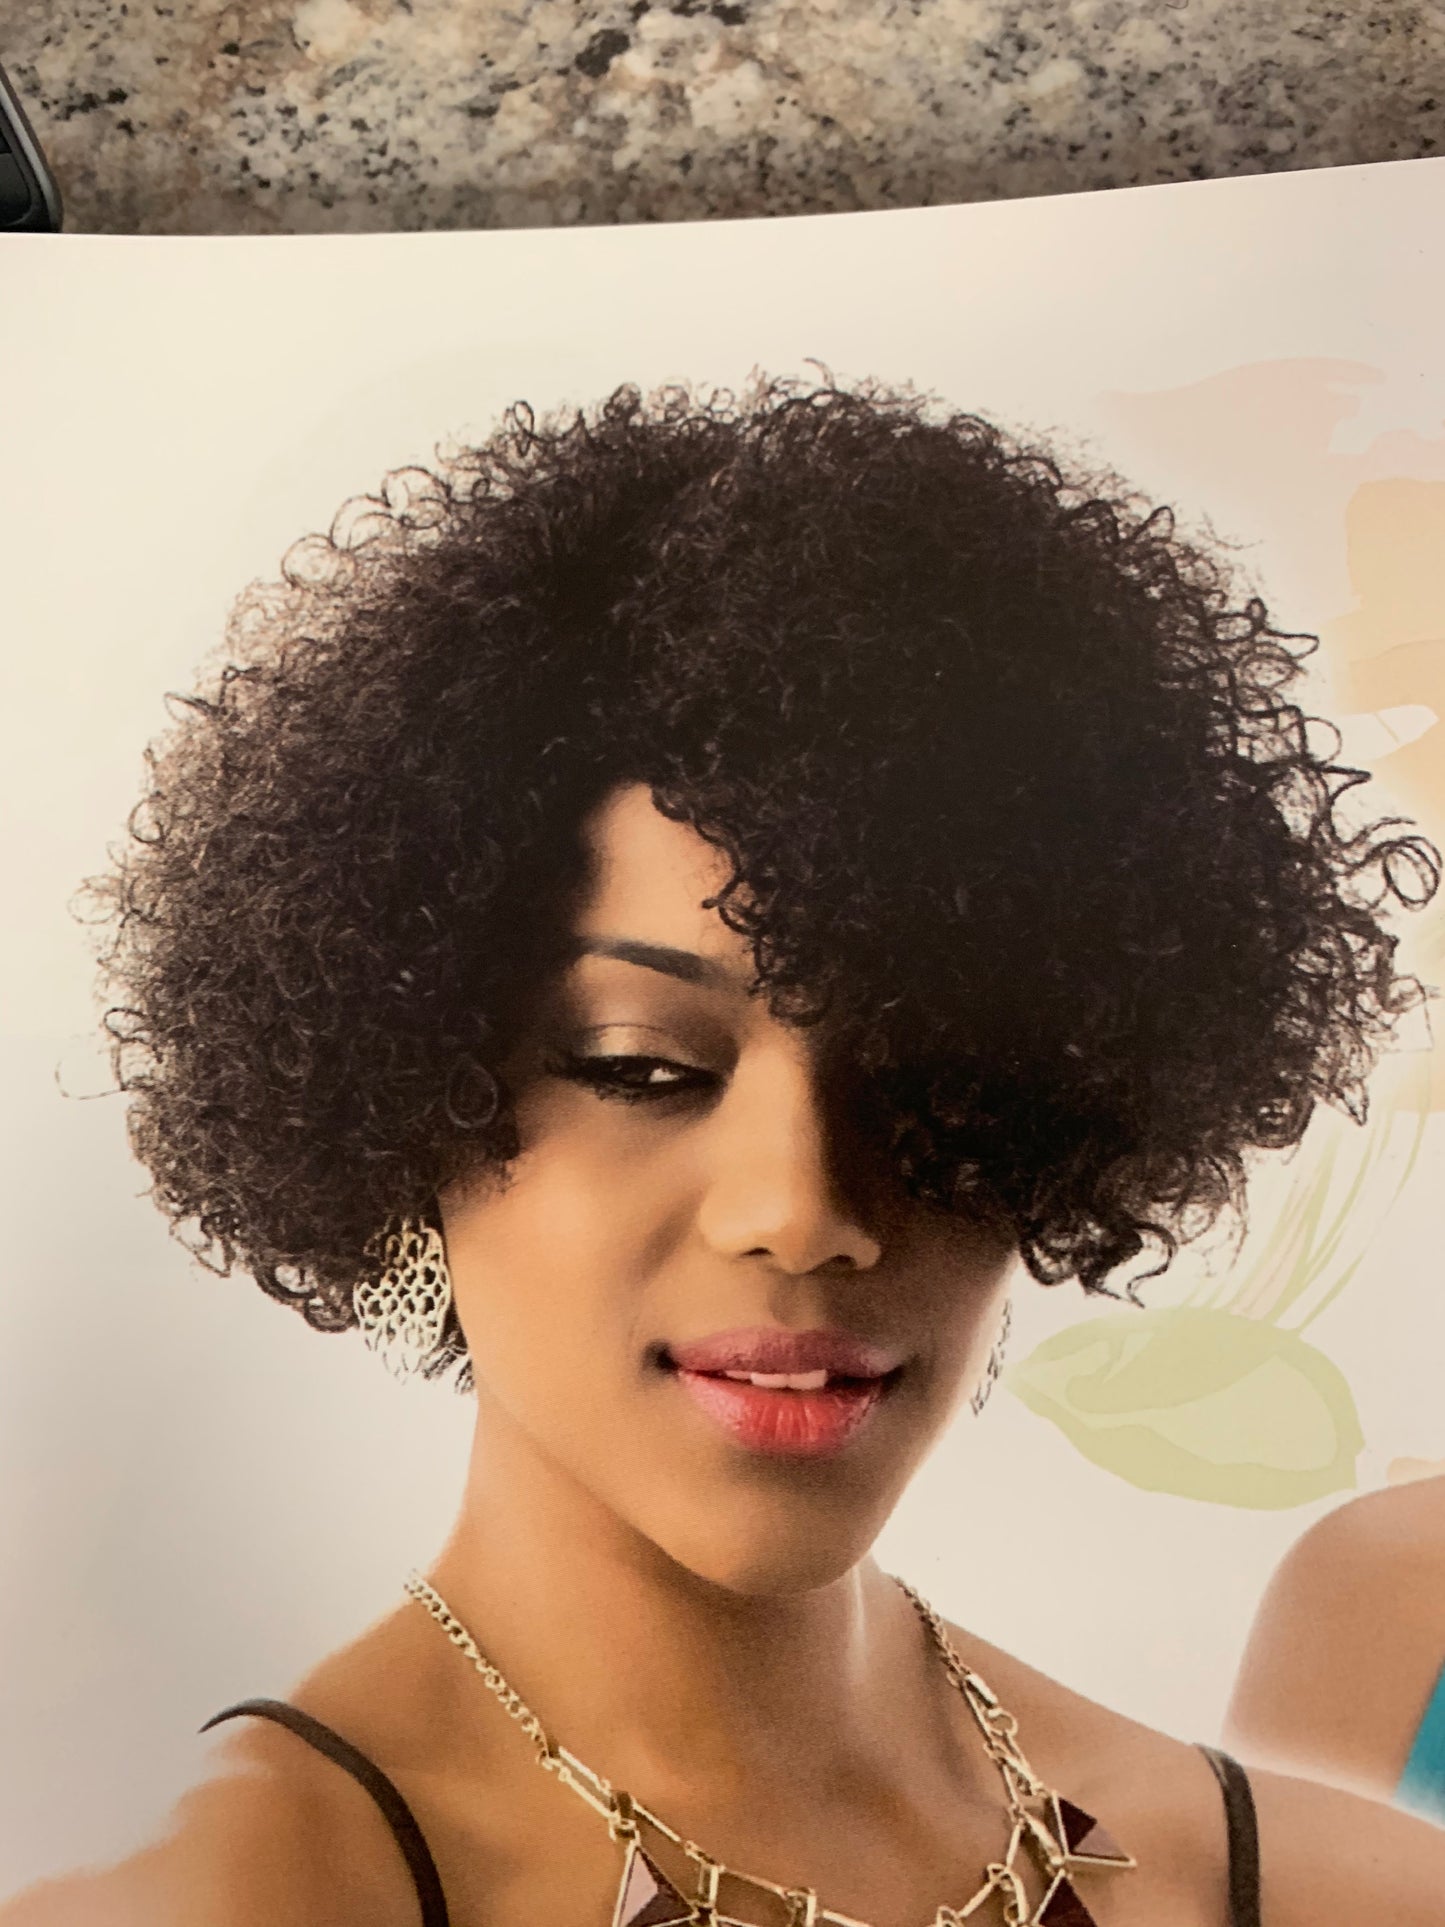 Afro Beauty: Victoria's Wig Human Hair